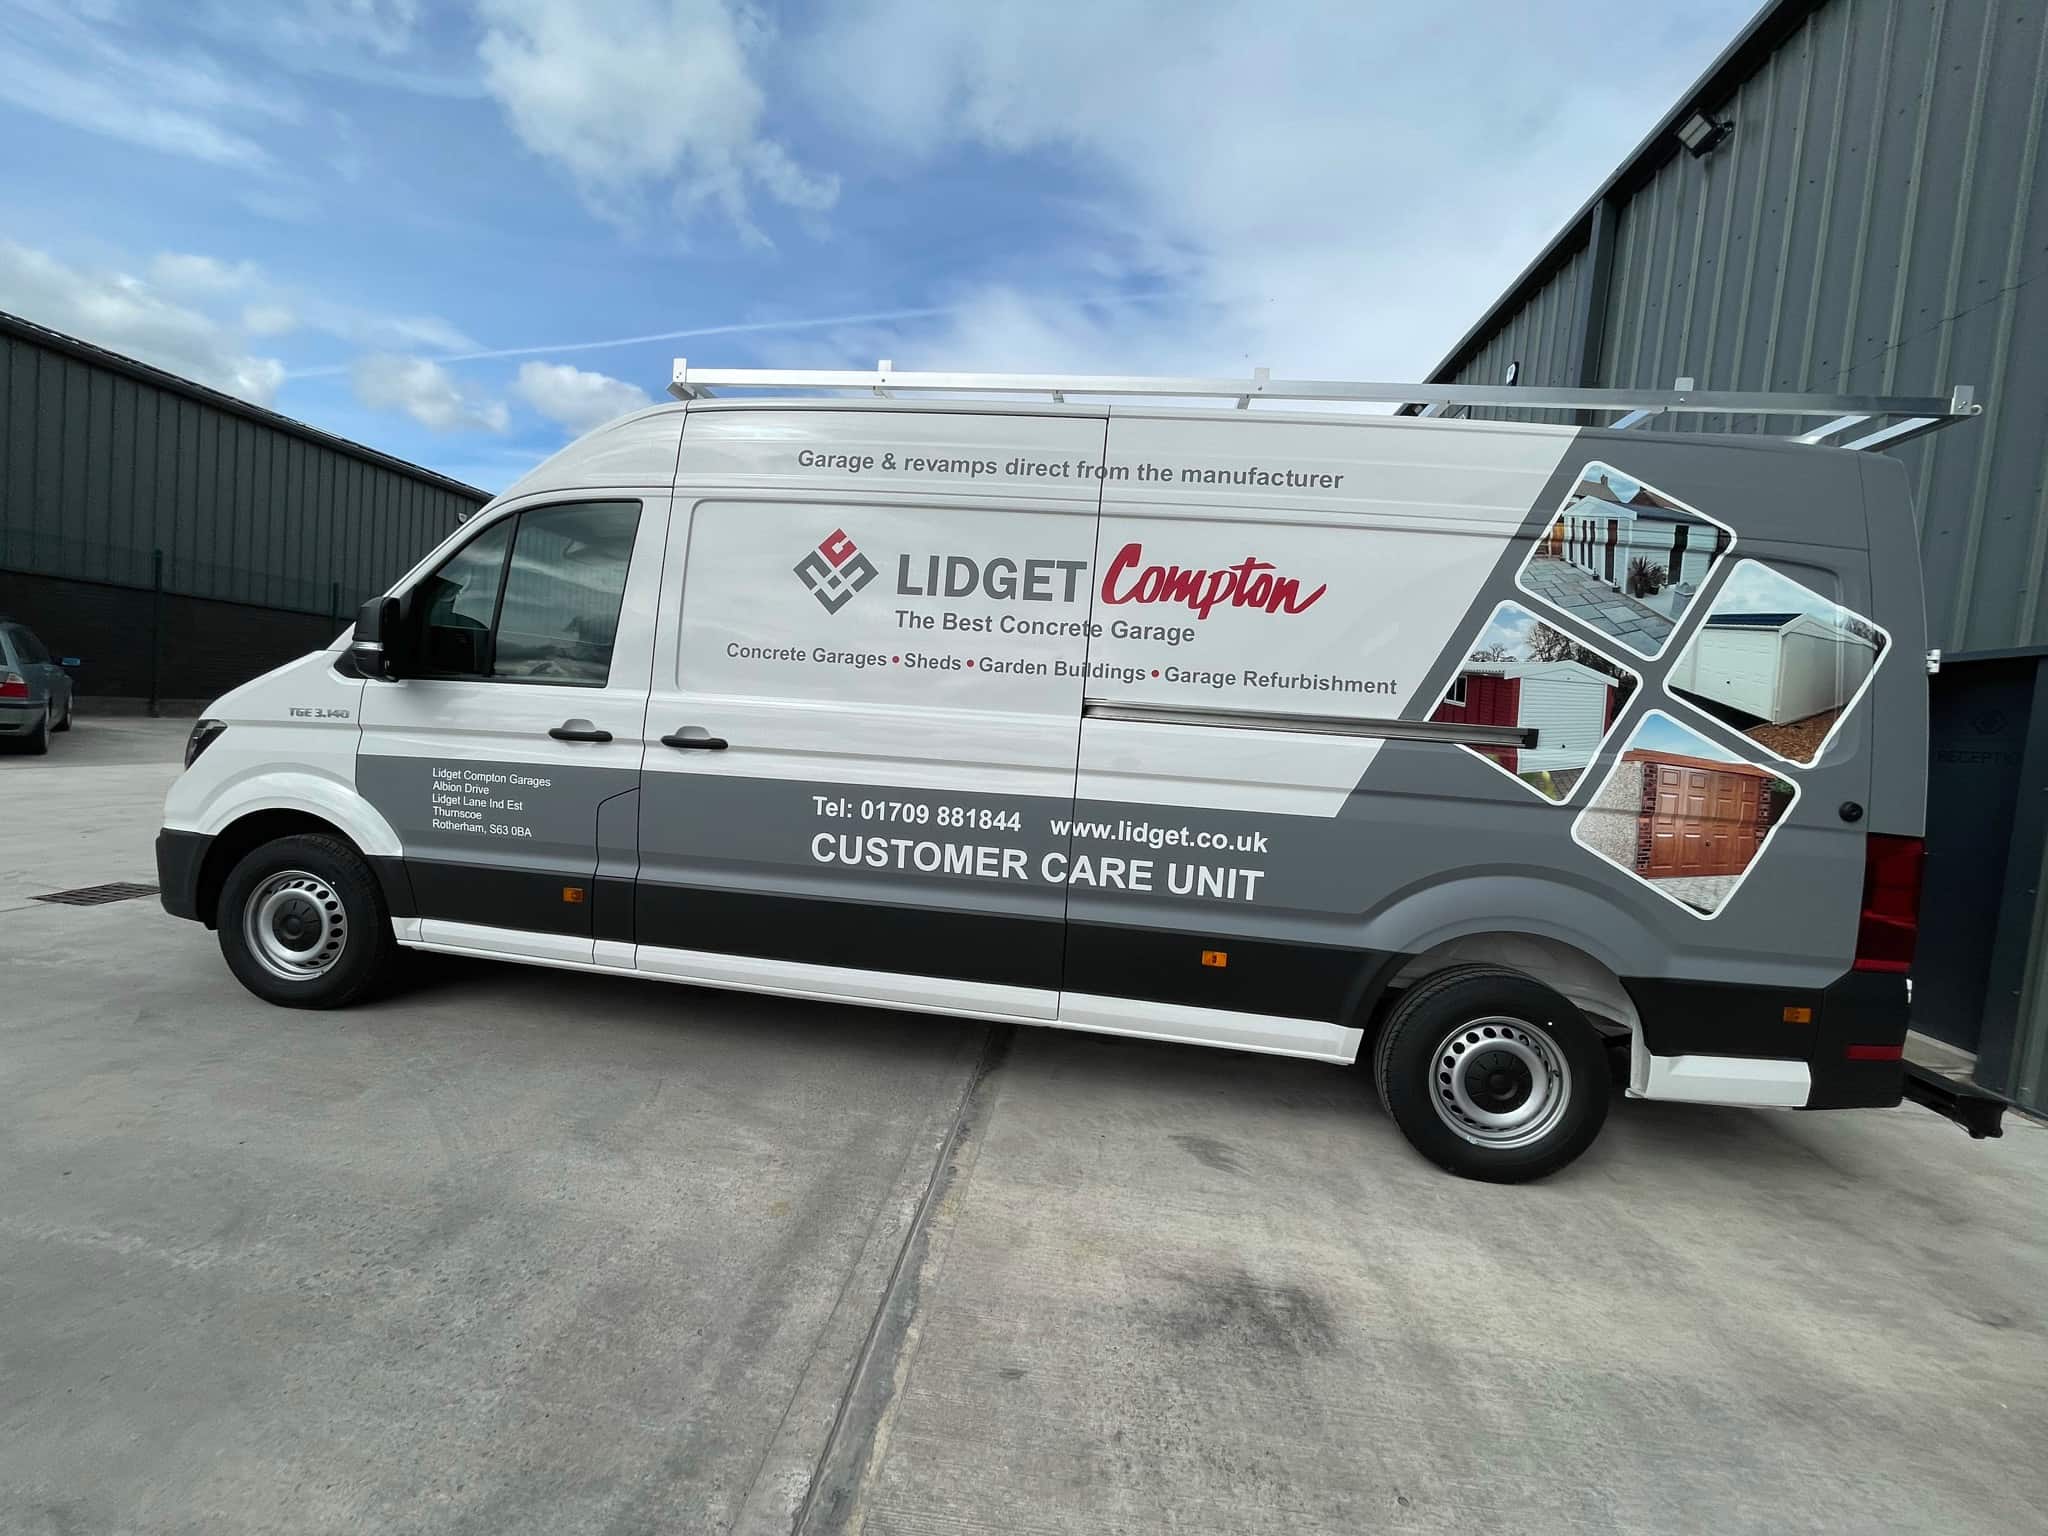 VEHICLE LIVERY AND GRAPHICS